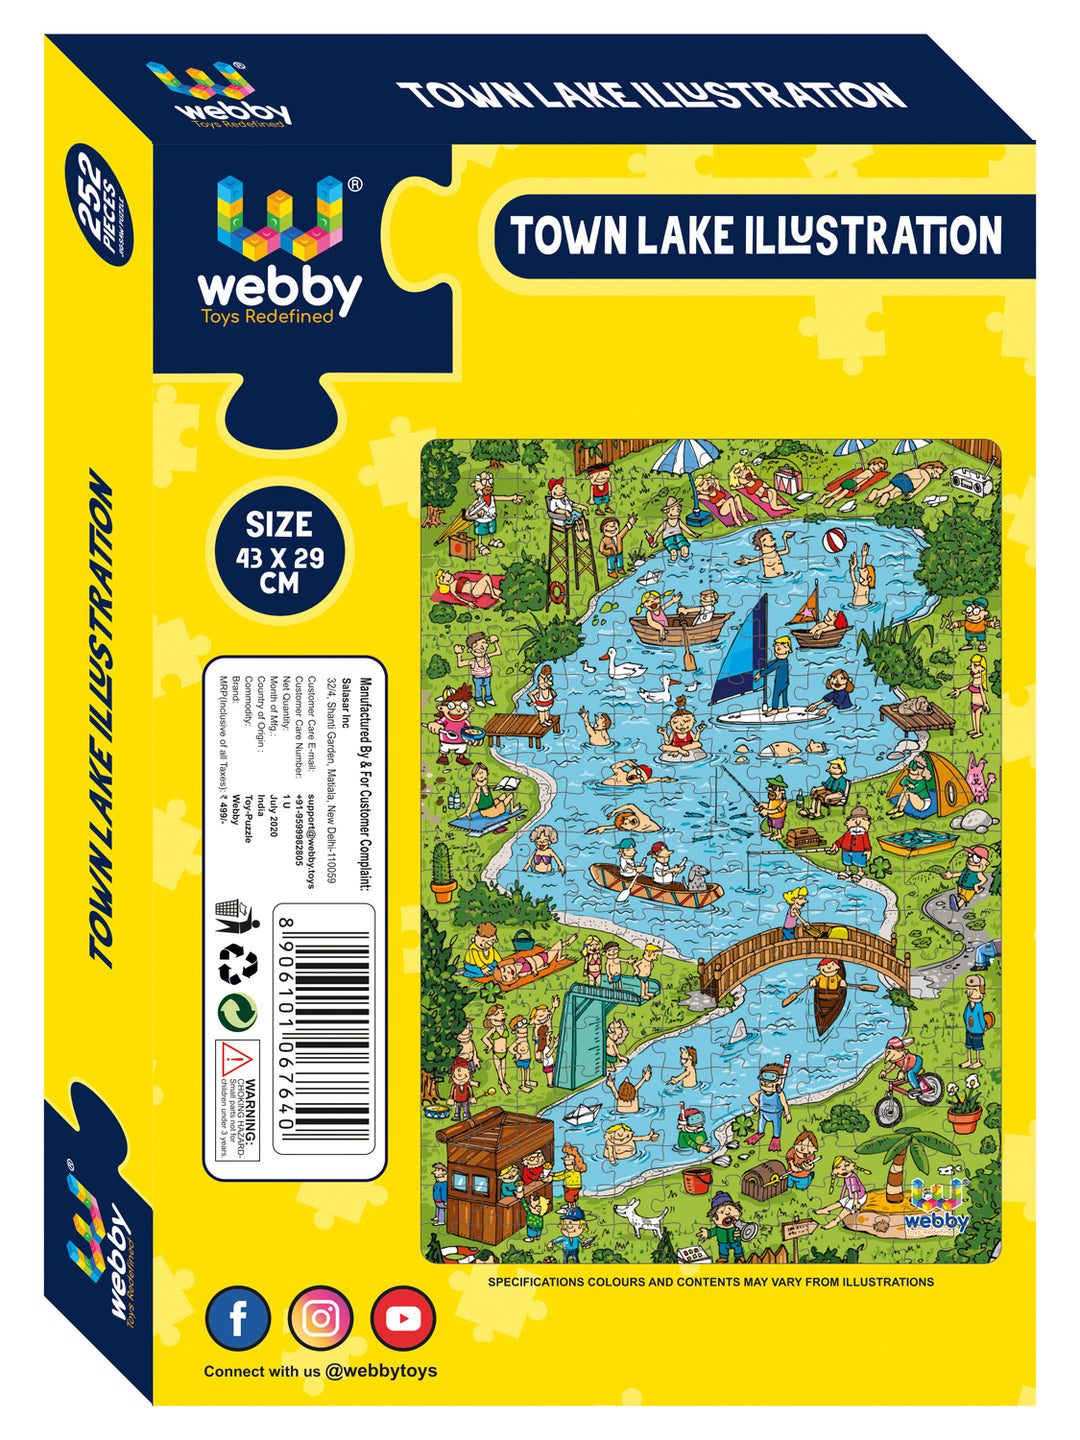 Webby Town Lake Illustration Jigsaw Puzzle, 252 pieces